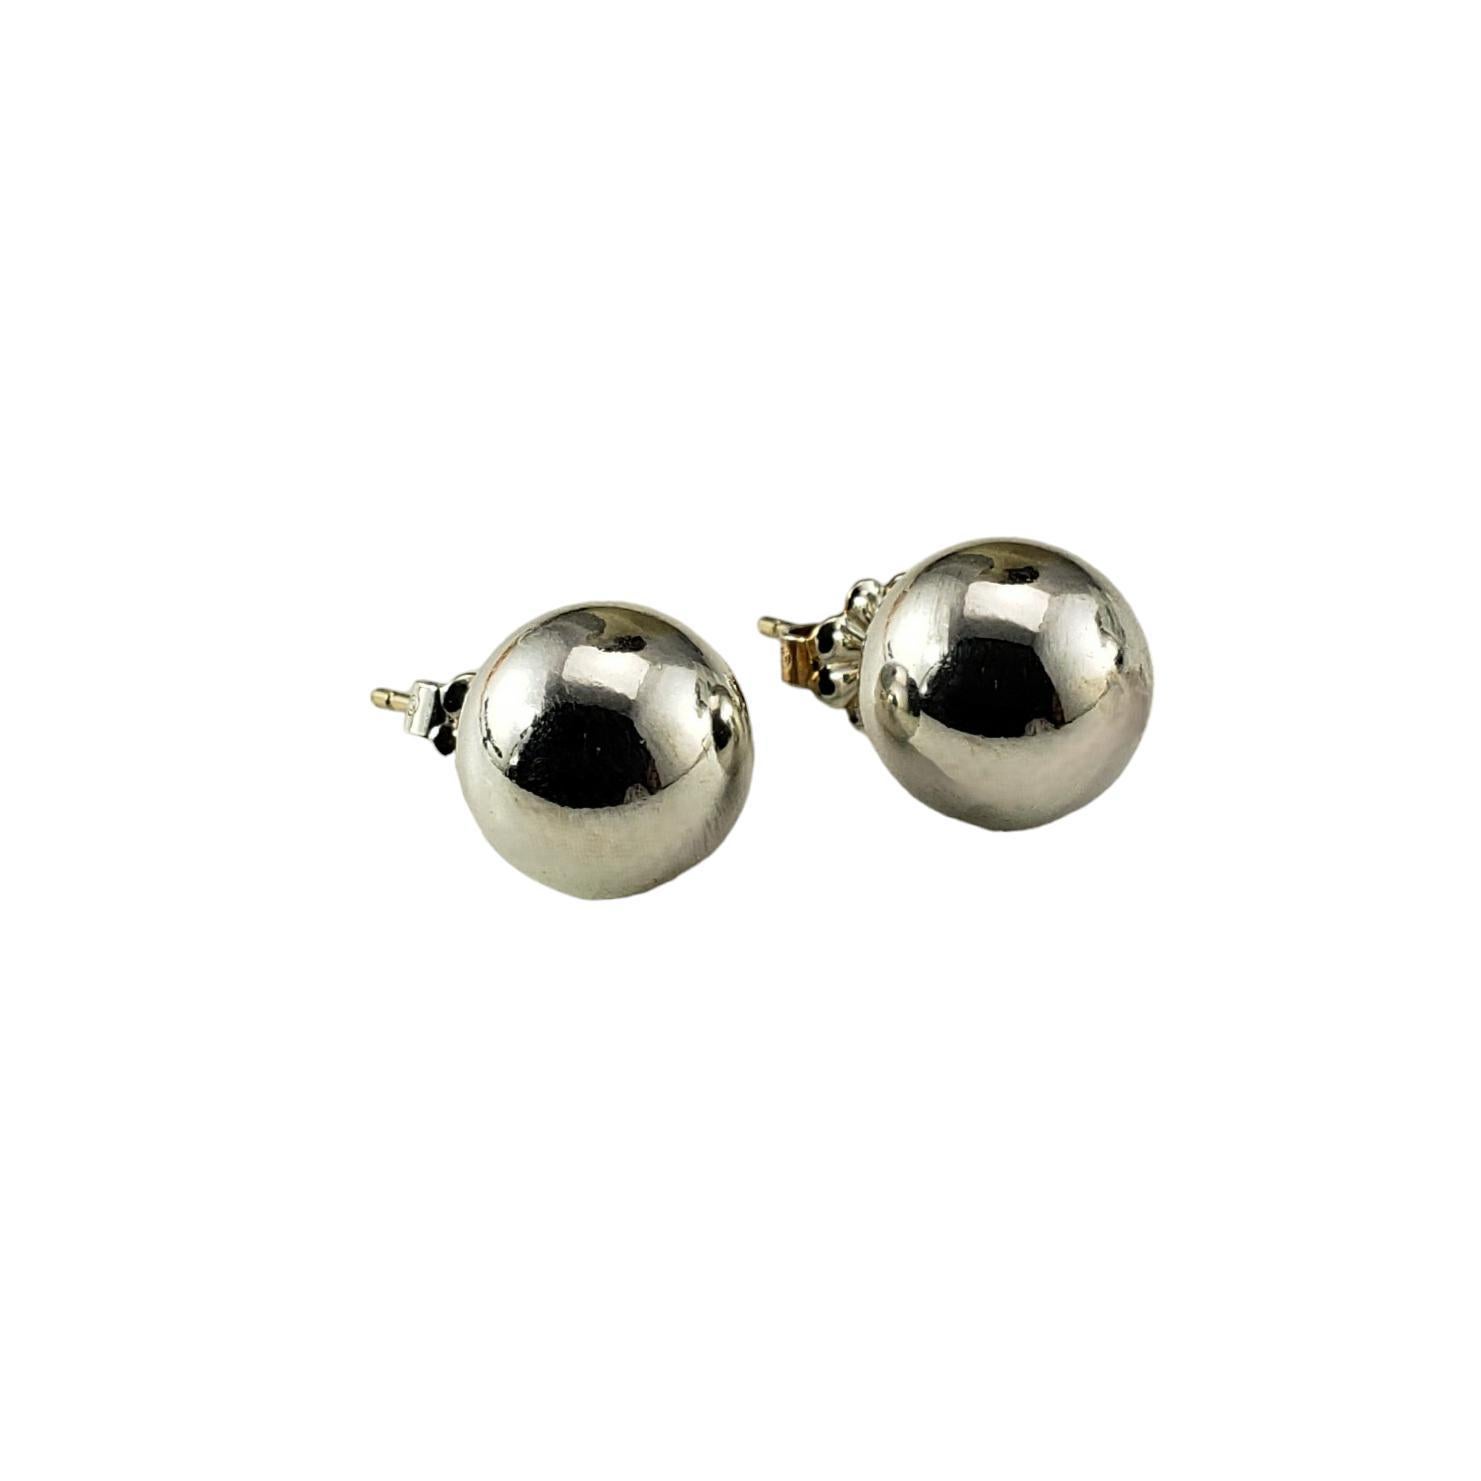 Tiffany & Co. Sterling Silver Ball 10mm Earrings #17163 In Good Condition For Sale In Washington Depot, CT